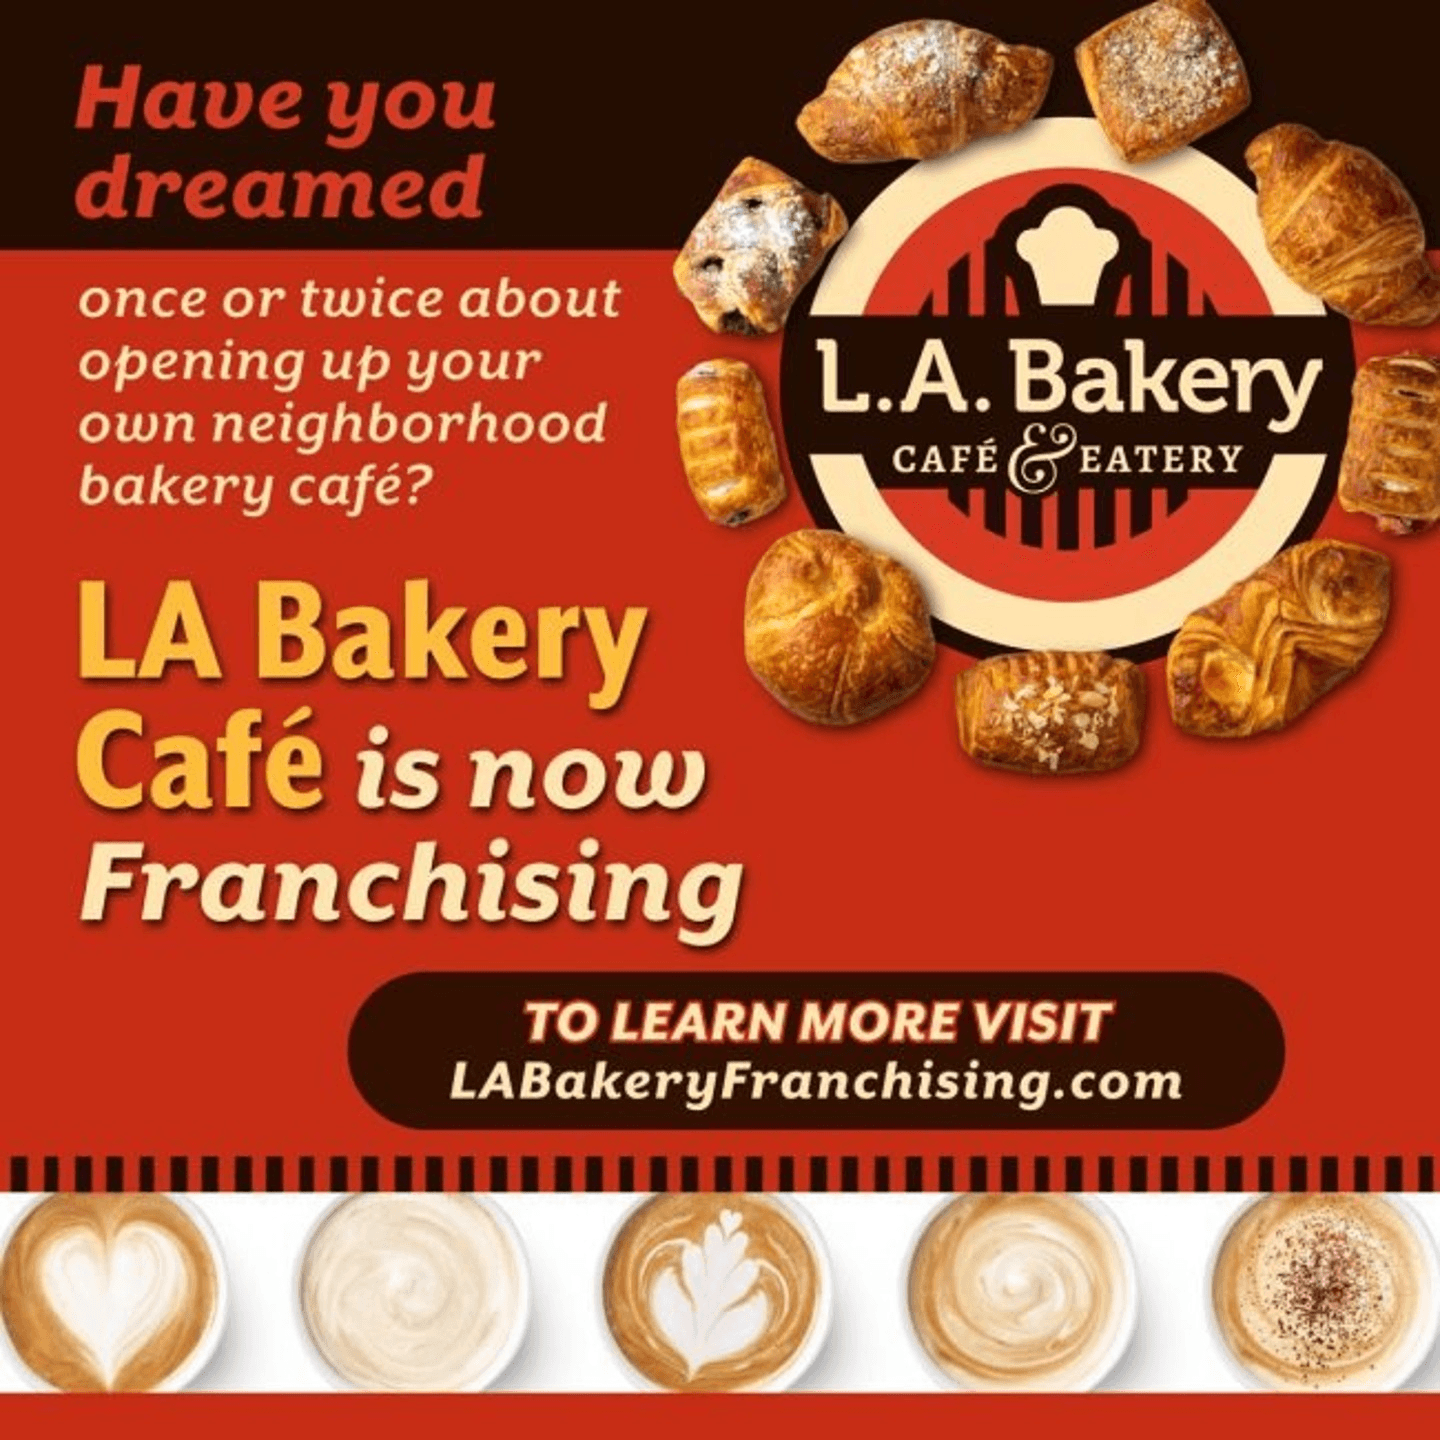 L.A. Bakery Franchise Opportunities!